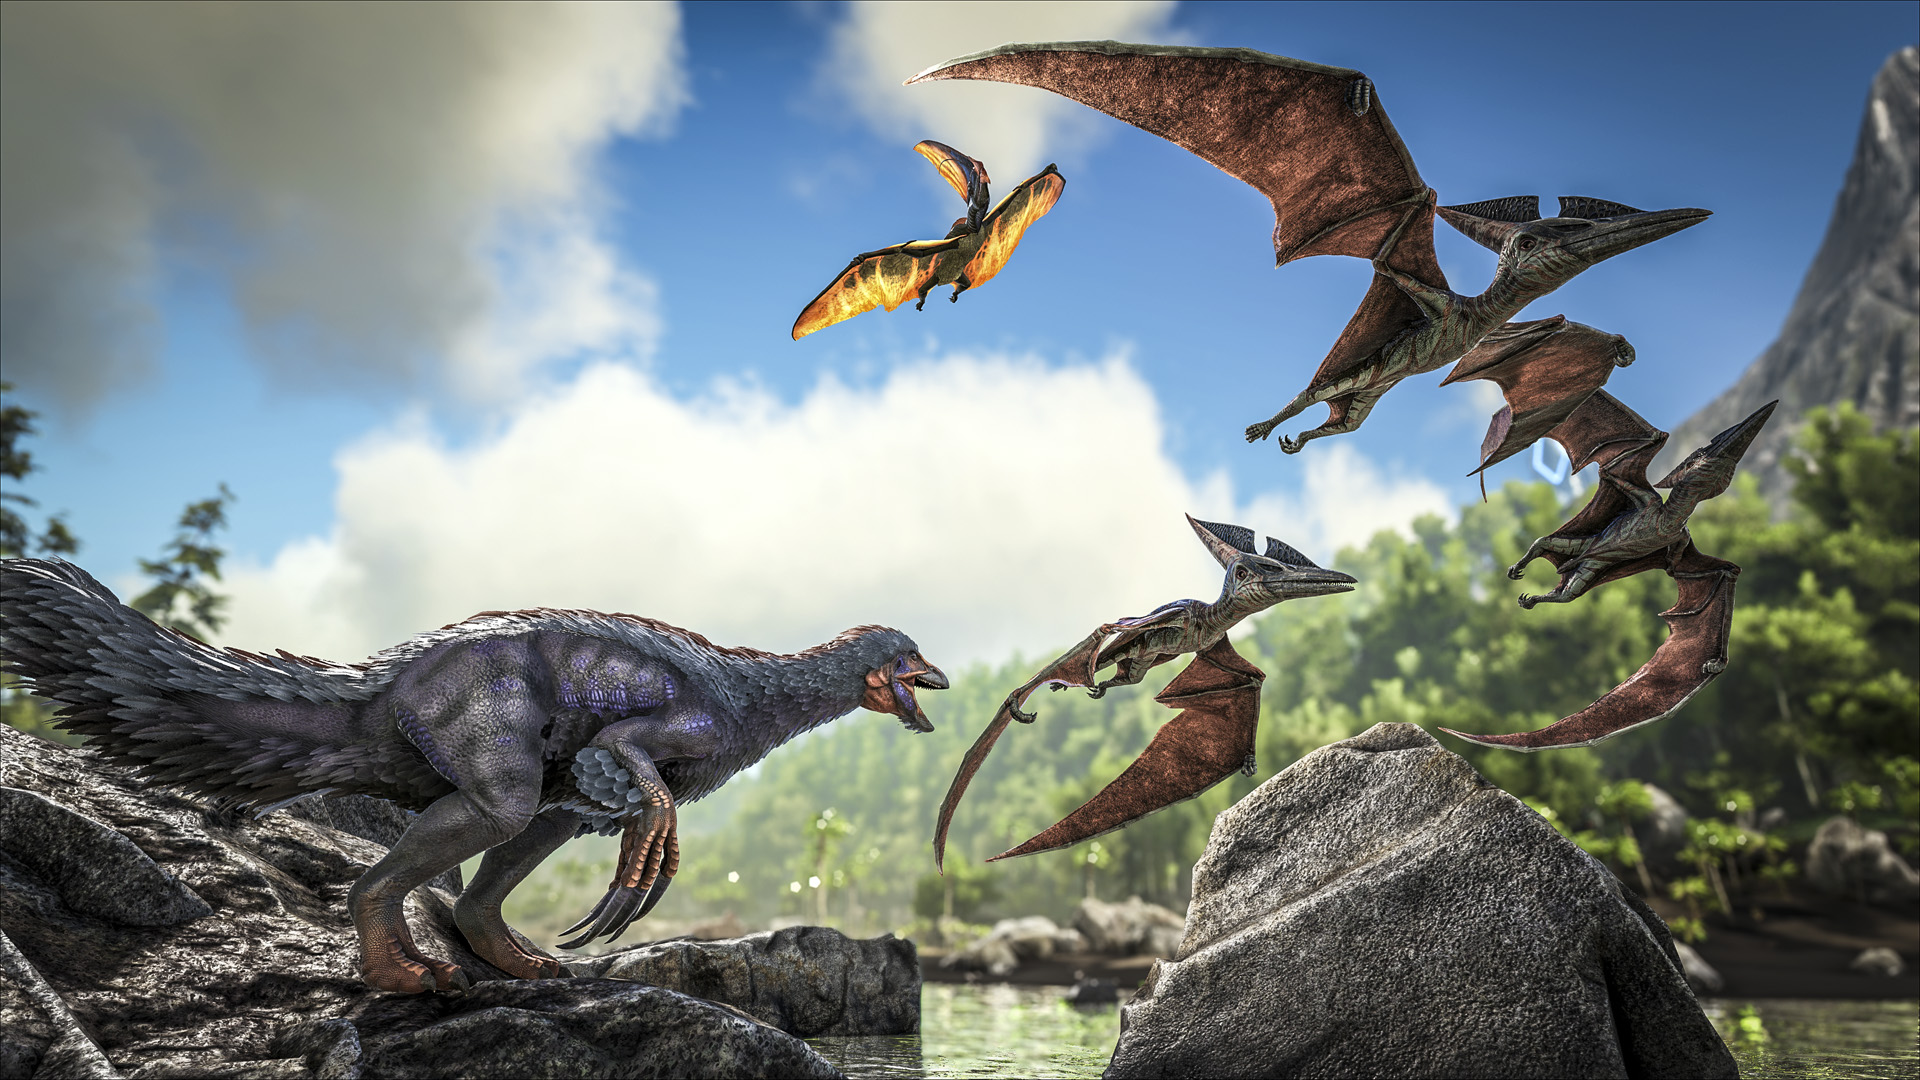 Ark: Survival Evolved is next week's free PC game on Epic